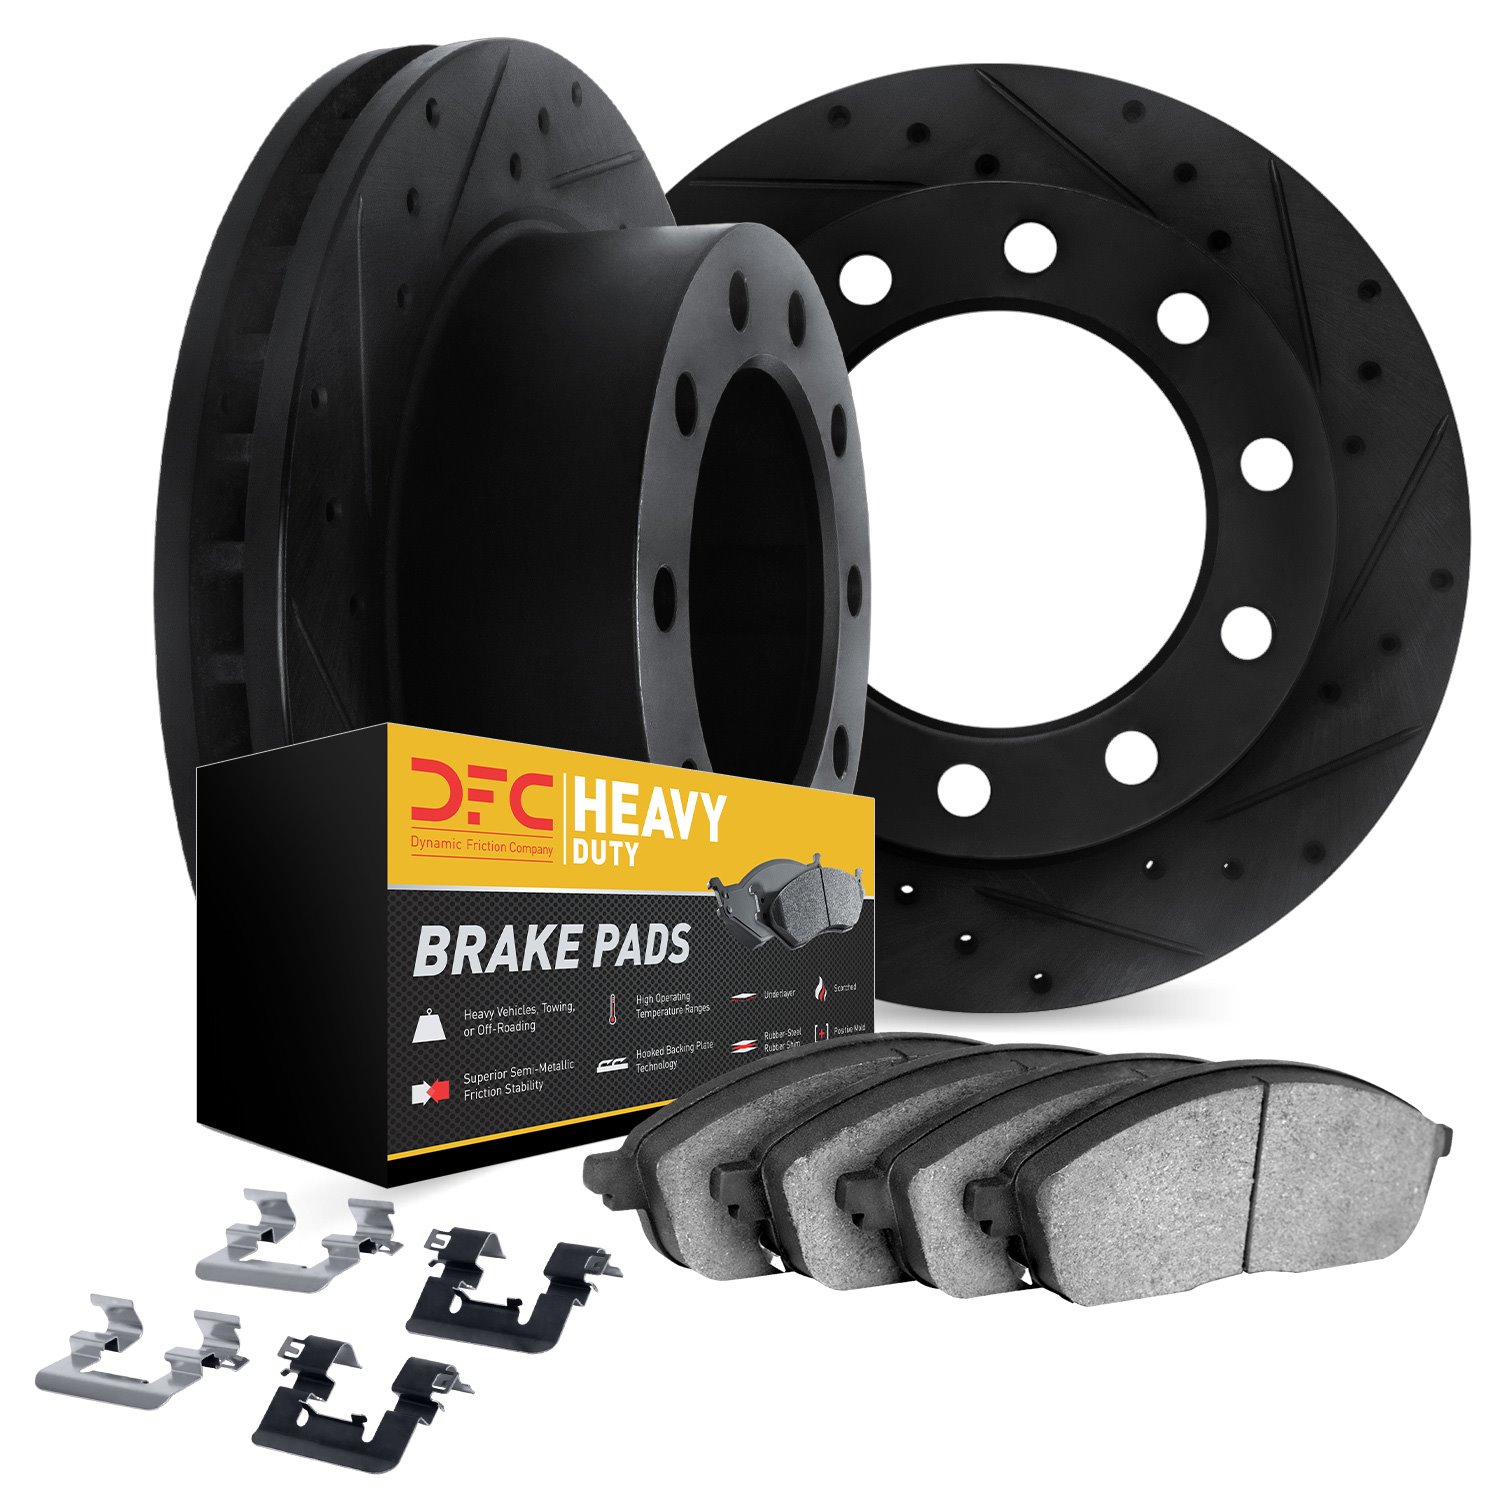 8212-99264 Drilled/Slotted Rotors w/Heavy-Duty Brake Pads Kit & Hardware [Black], Fits Select Ford/Lincoln/Mercury/Mazda, Positi